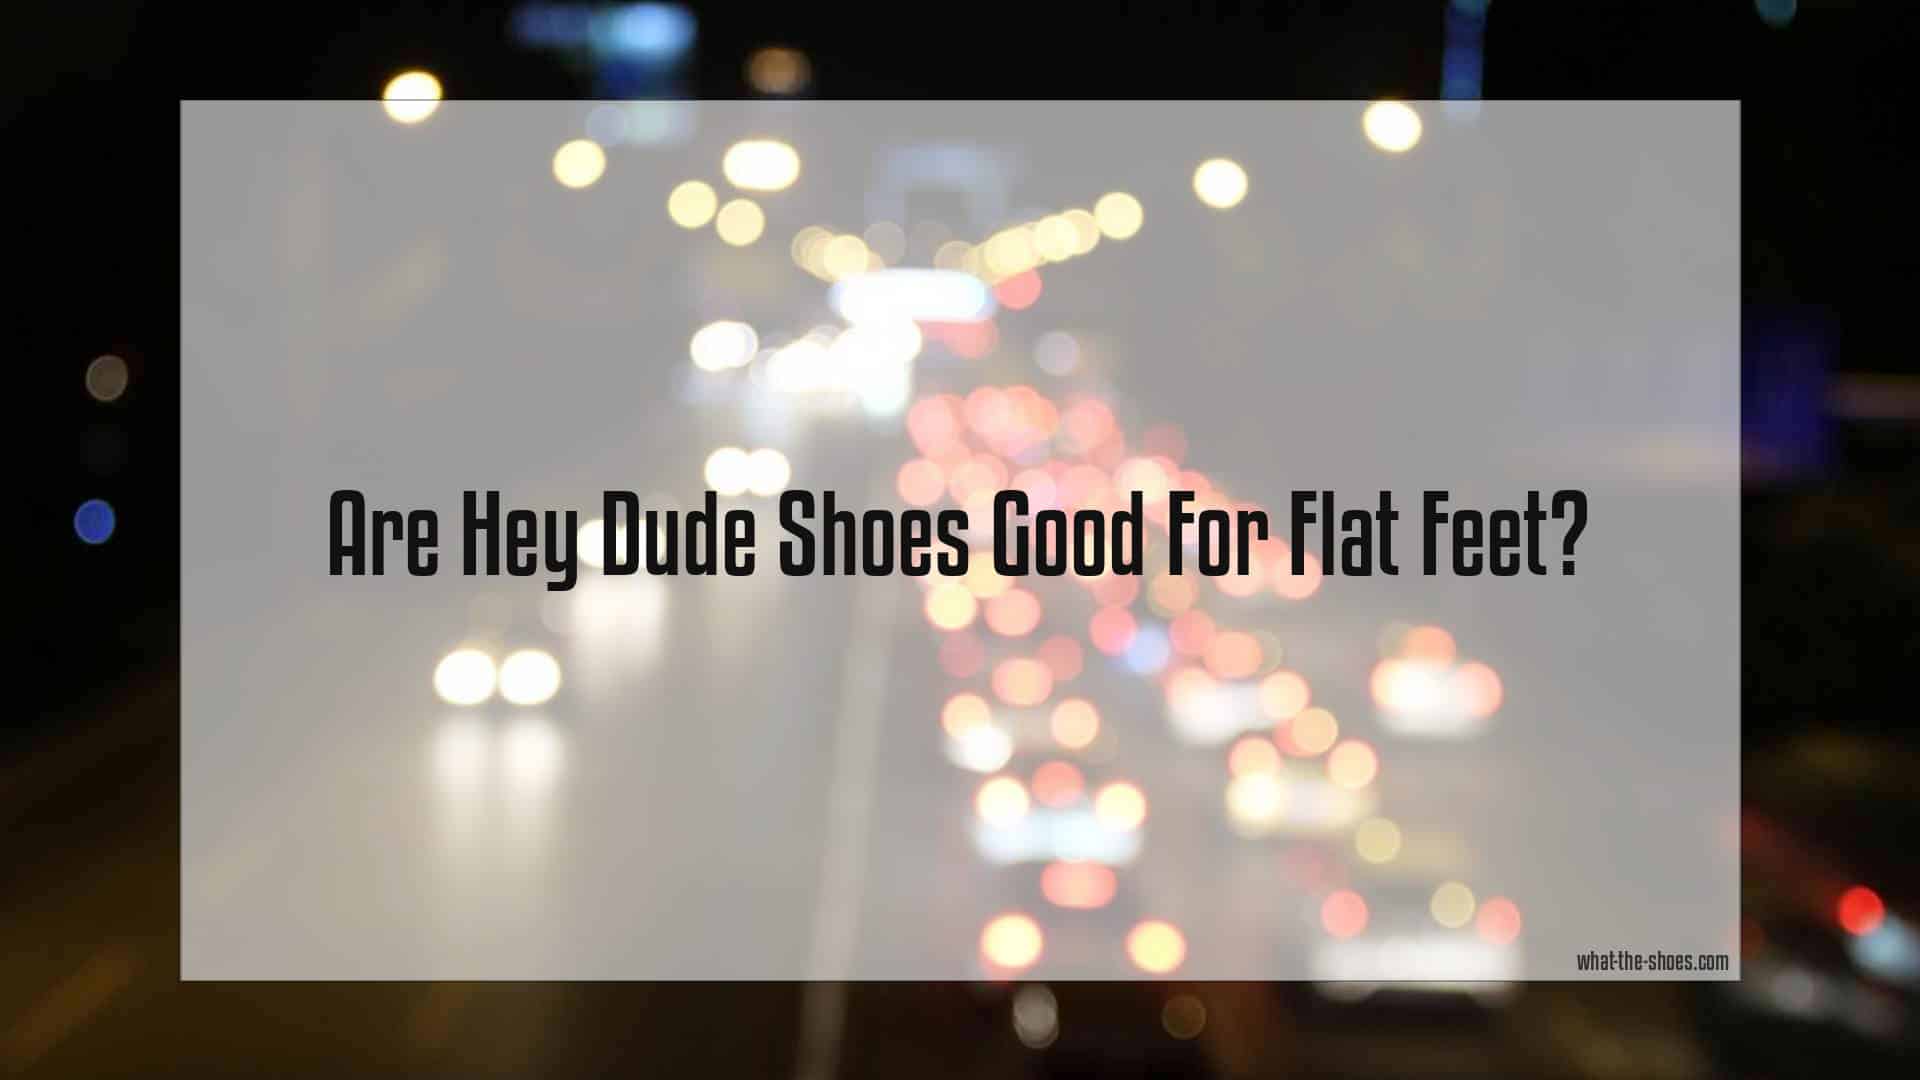 Are Hey Dude Shoes Good For Flat Feet?